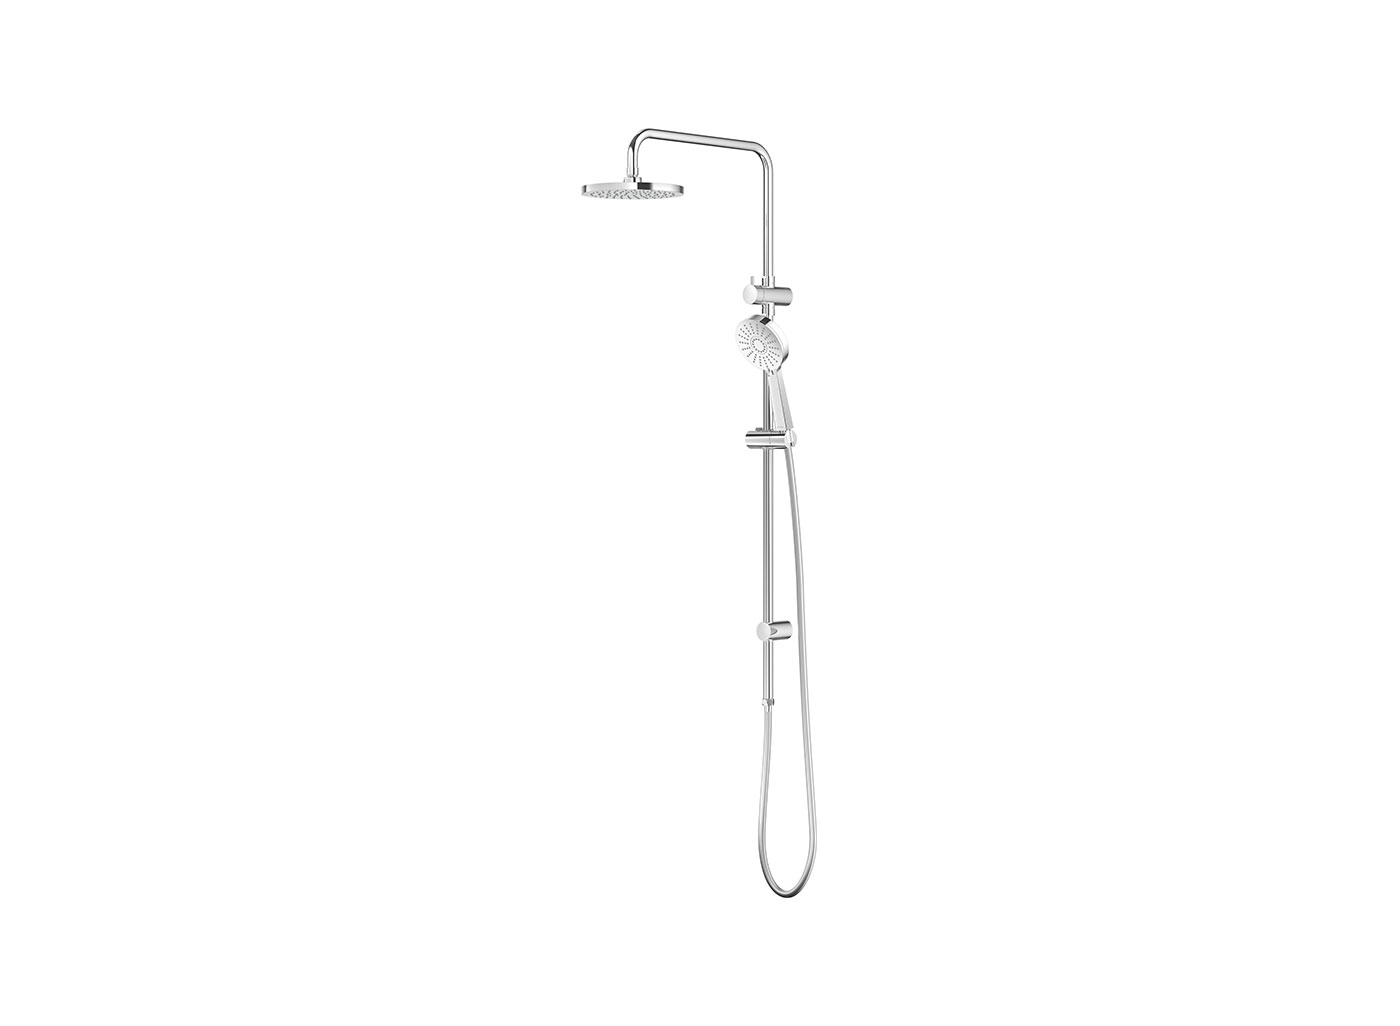 - 3 function Krome handset and single function chrome plated 200mm overhead drencher